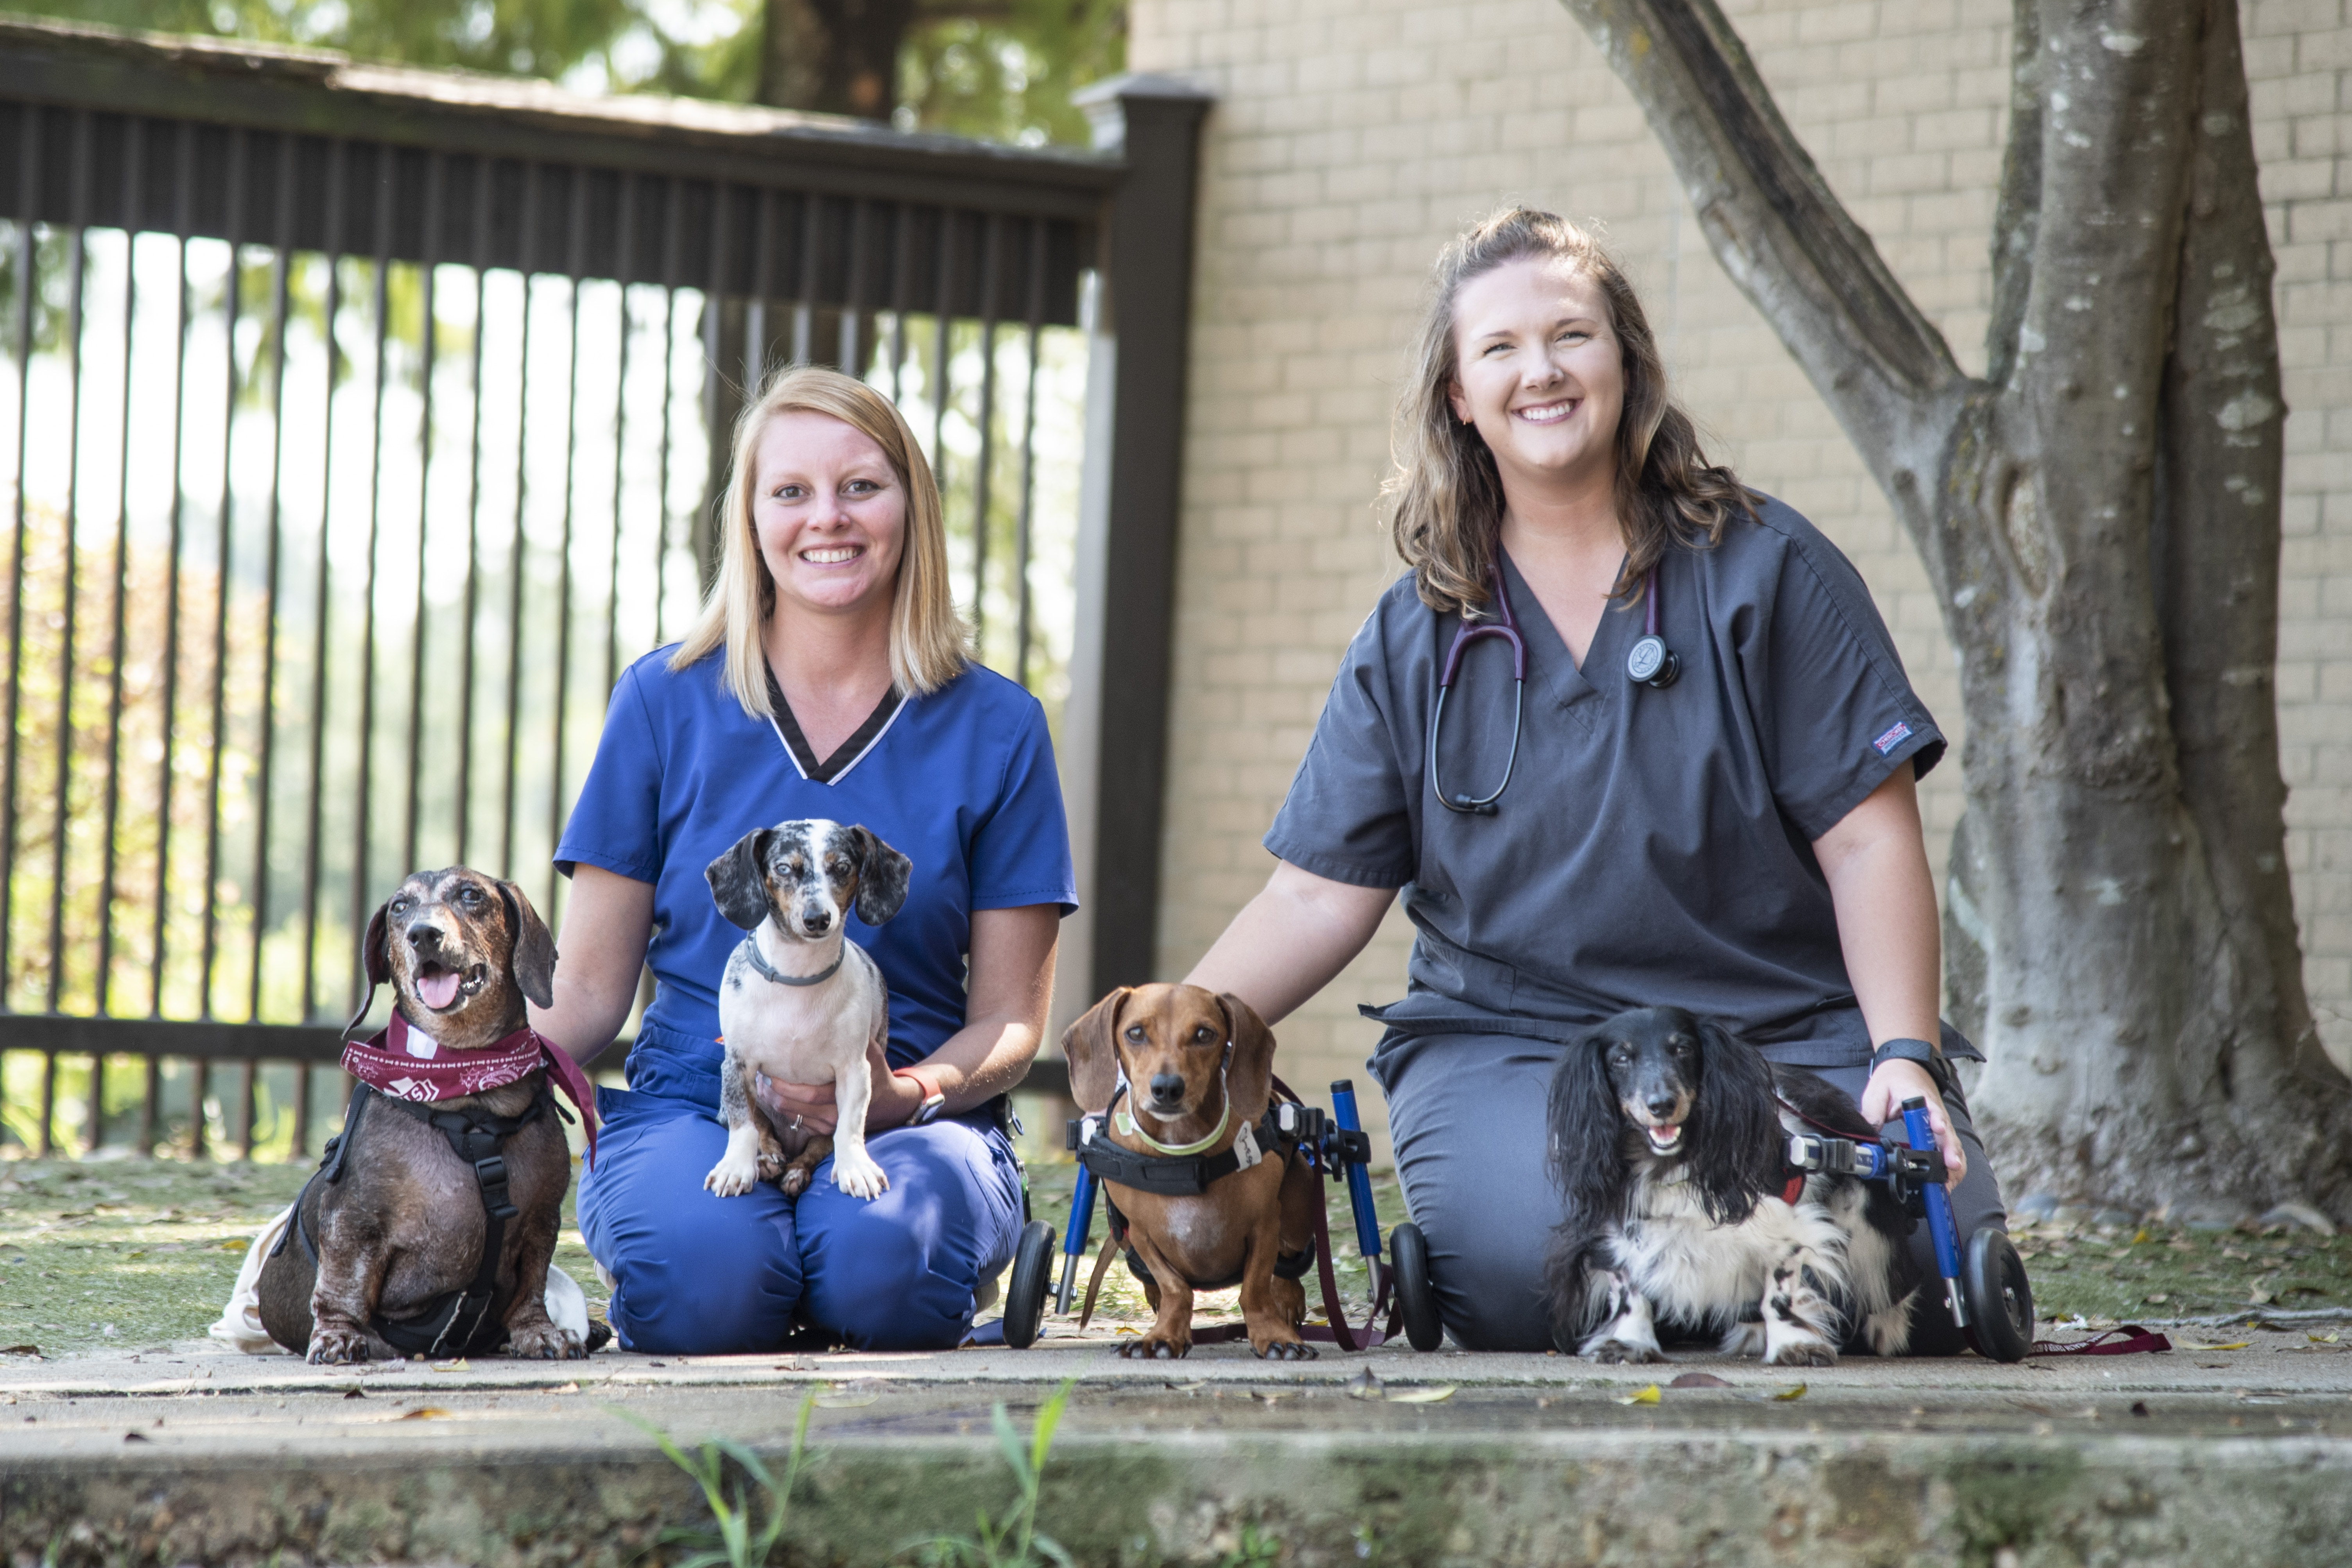 Two veterinary students pose with four dachshunds in wheelchairs